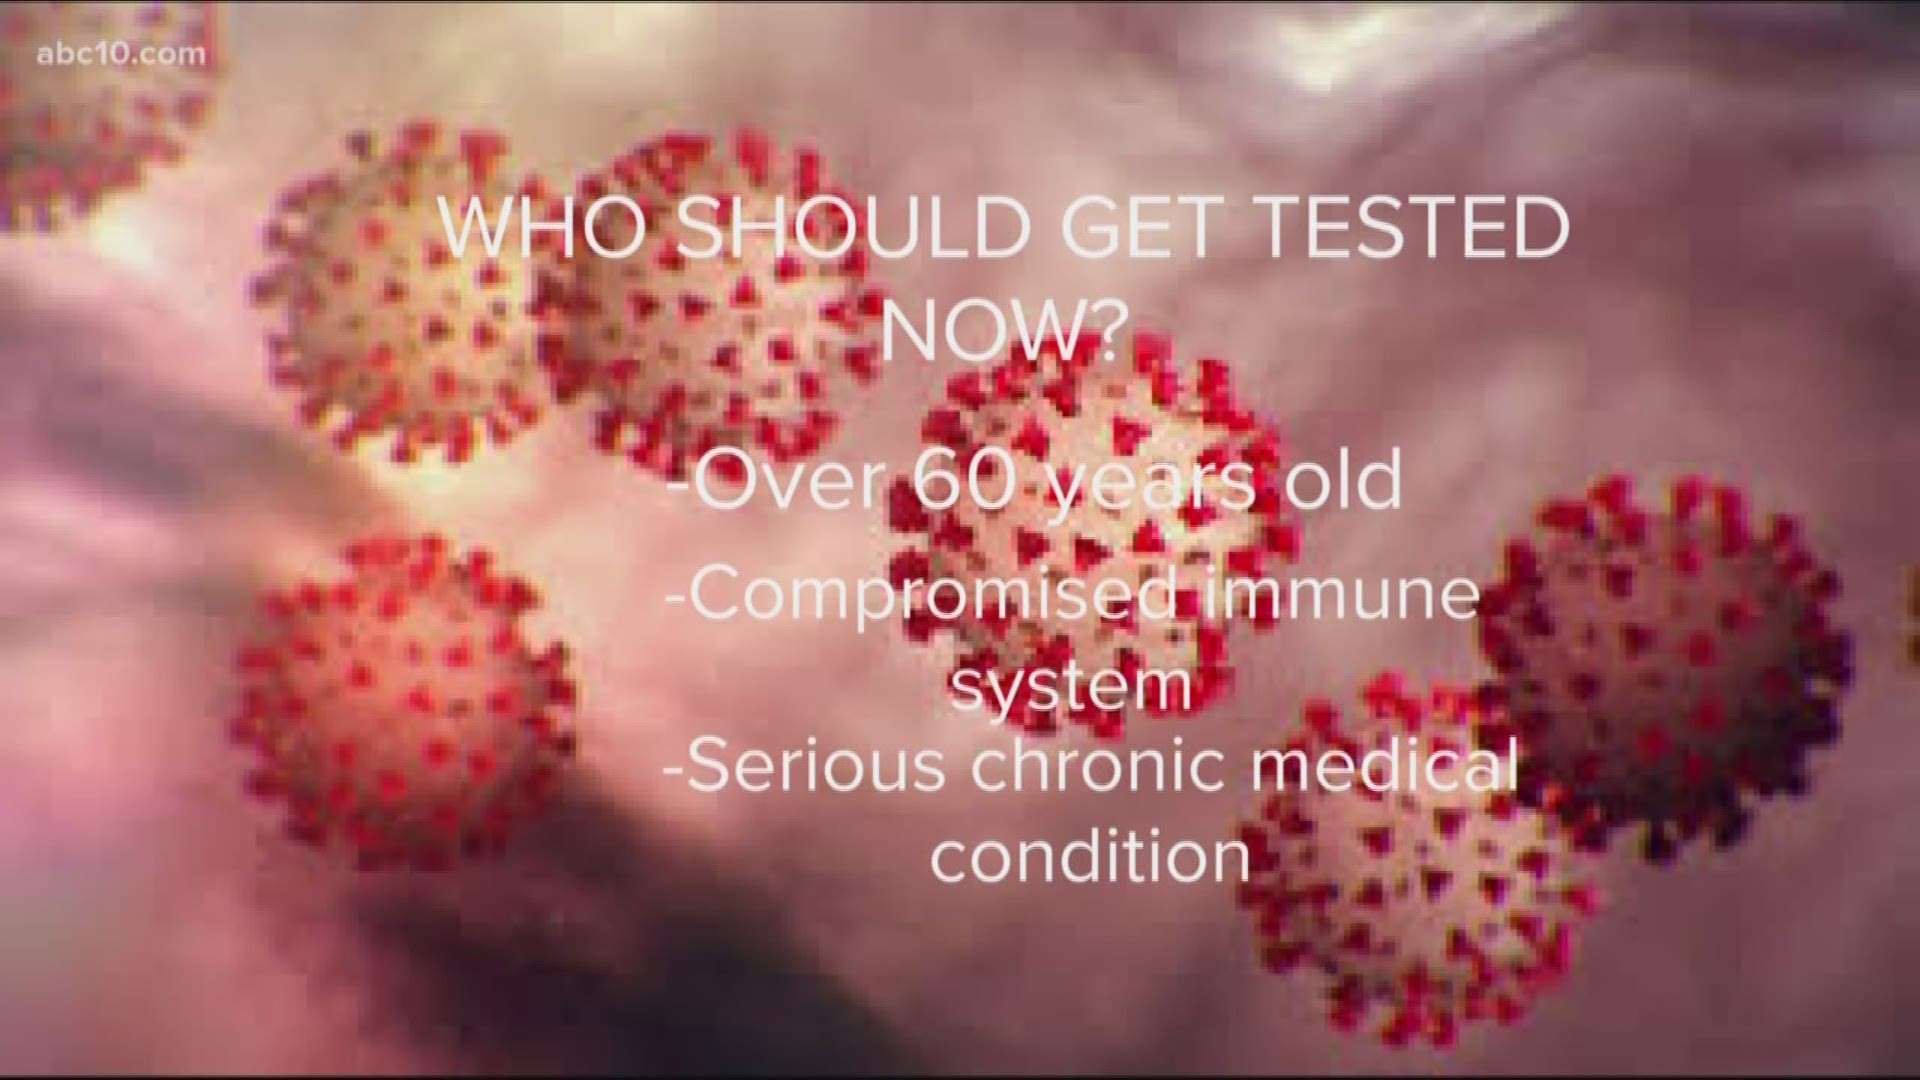 Google sister company Verily's "Project Baseline" is helping screen people in Sacramento and other cities to decide if they should get tested for coronavirus.